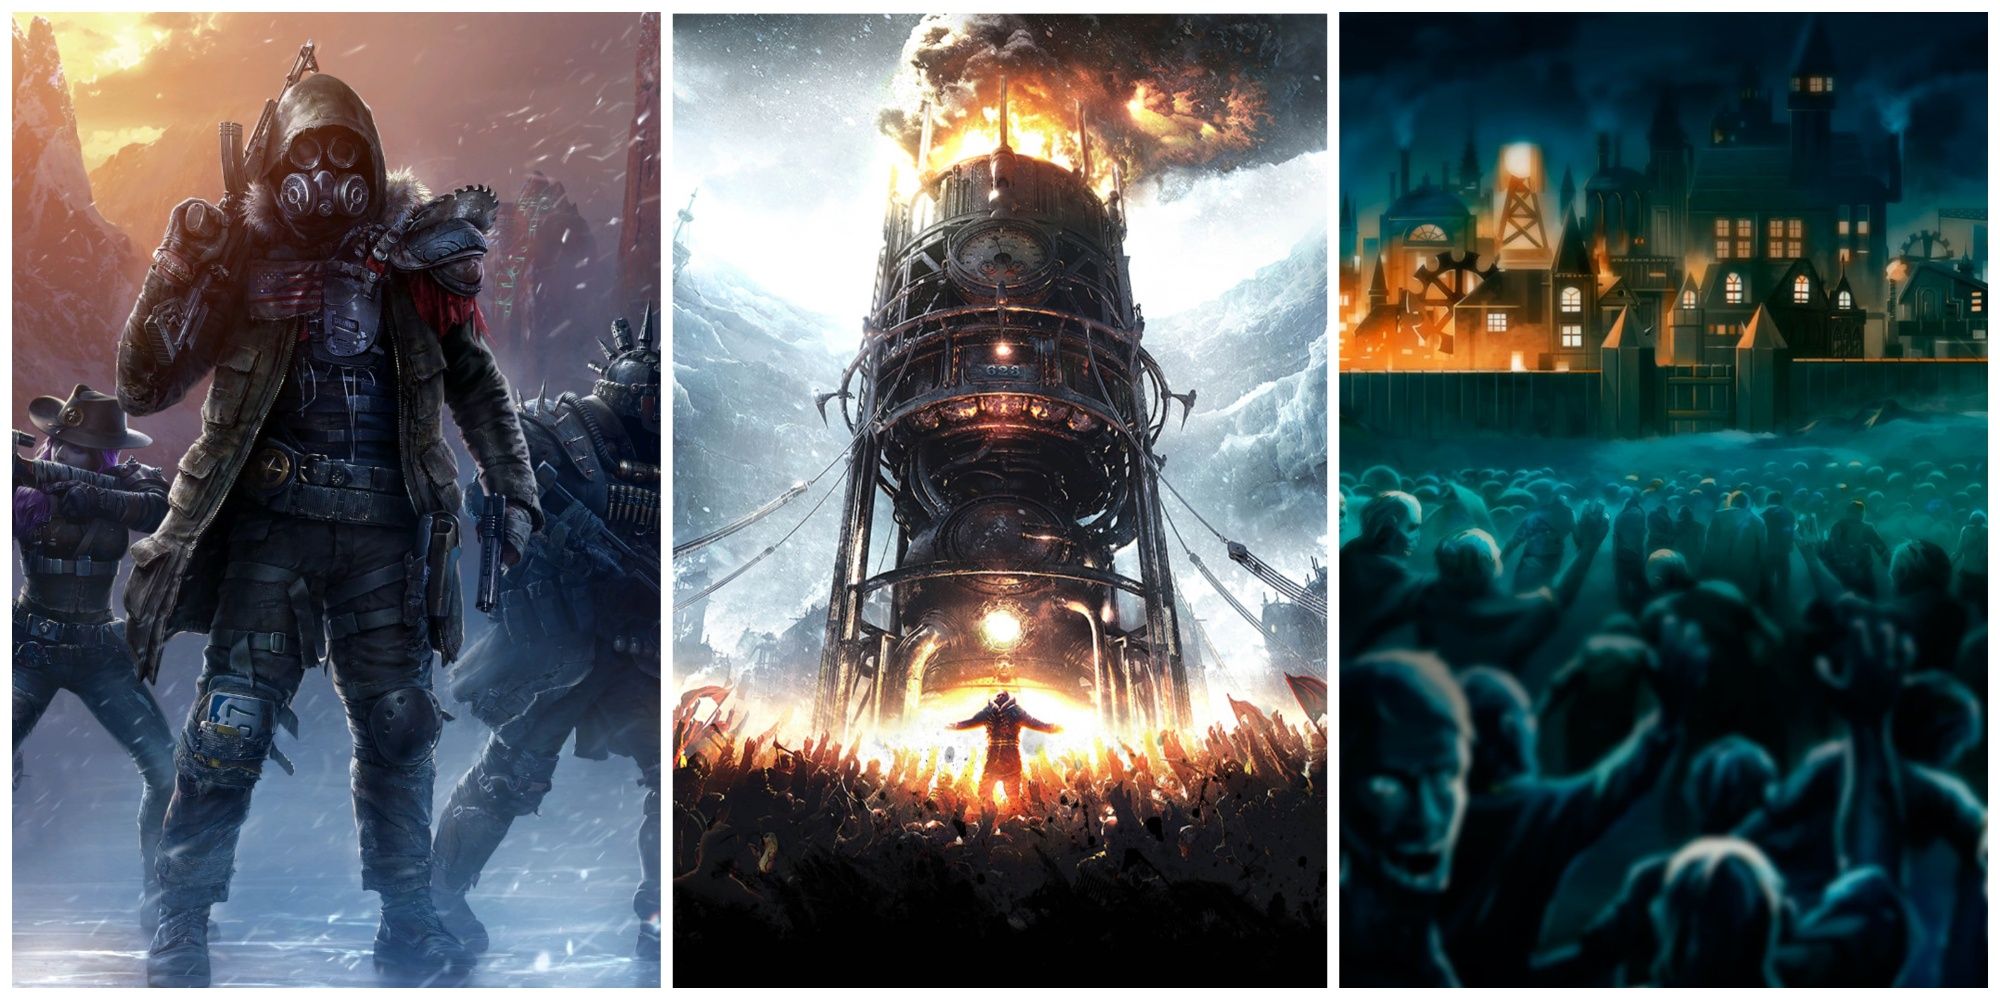 Wasteland 3, Frostpunk, and They Are Billions